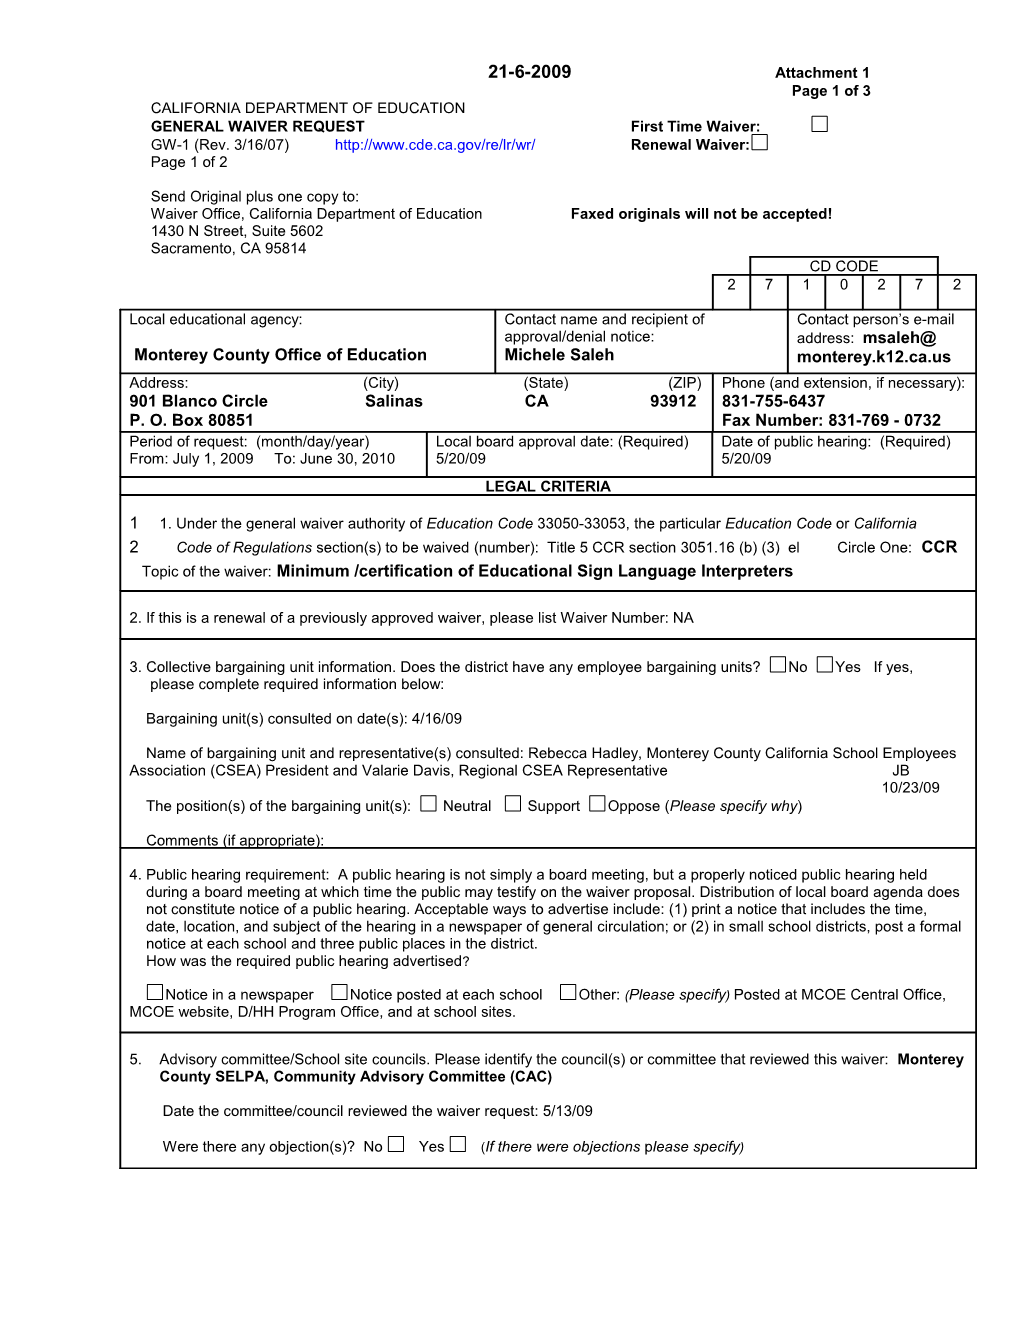 November 2009 Waiver Item W15 Attachment 1 - Meeting Agendas (CA State Board of Education)